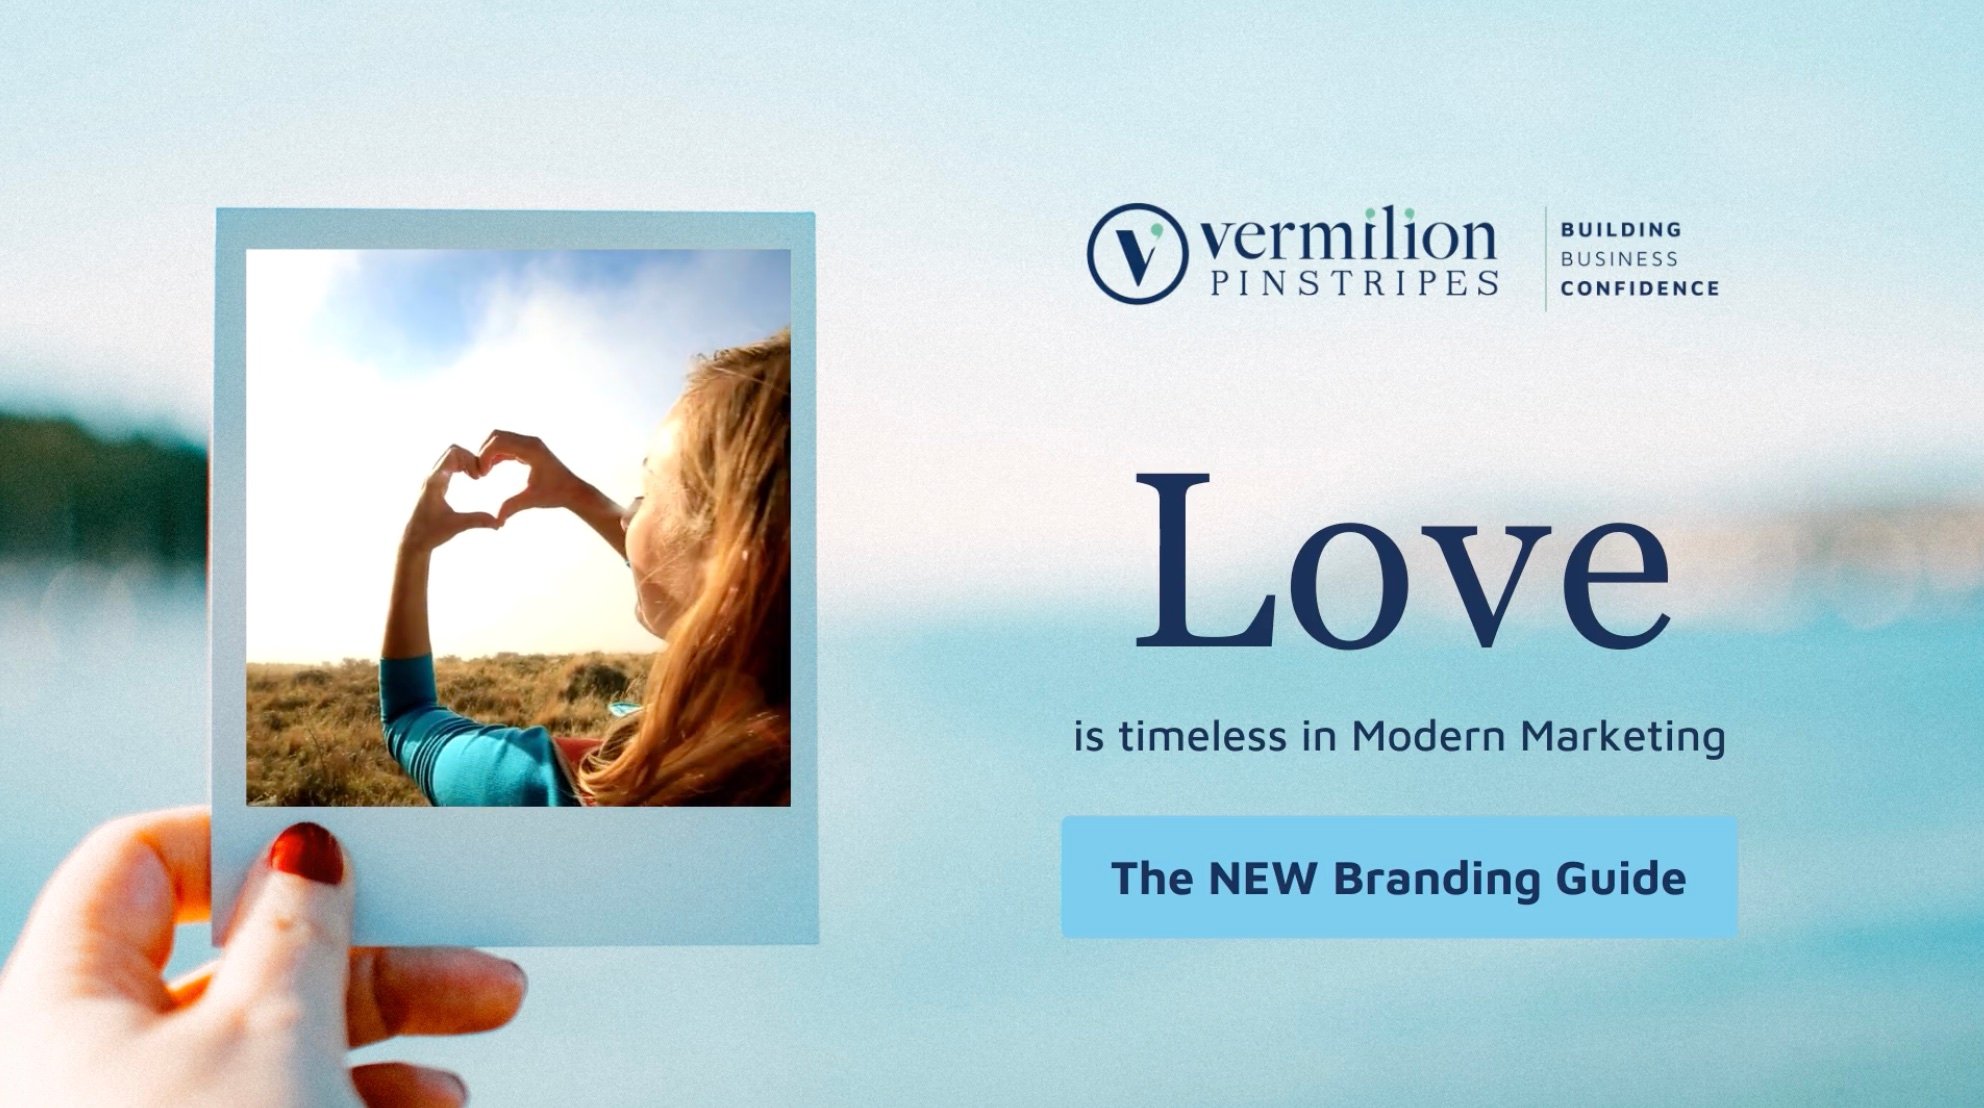 Love is timeless in Modern Marketing by vermilion pinstripes